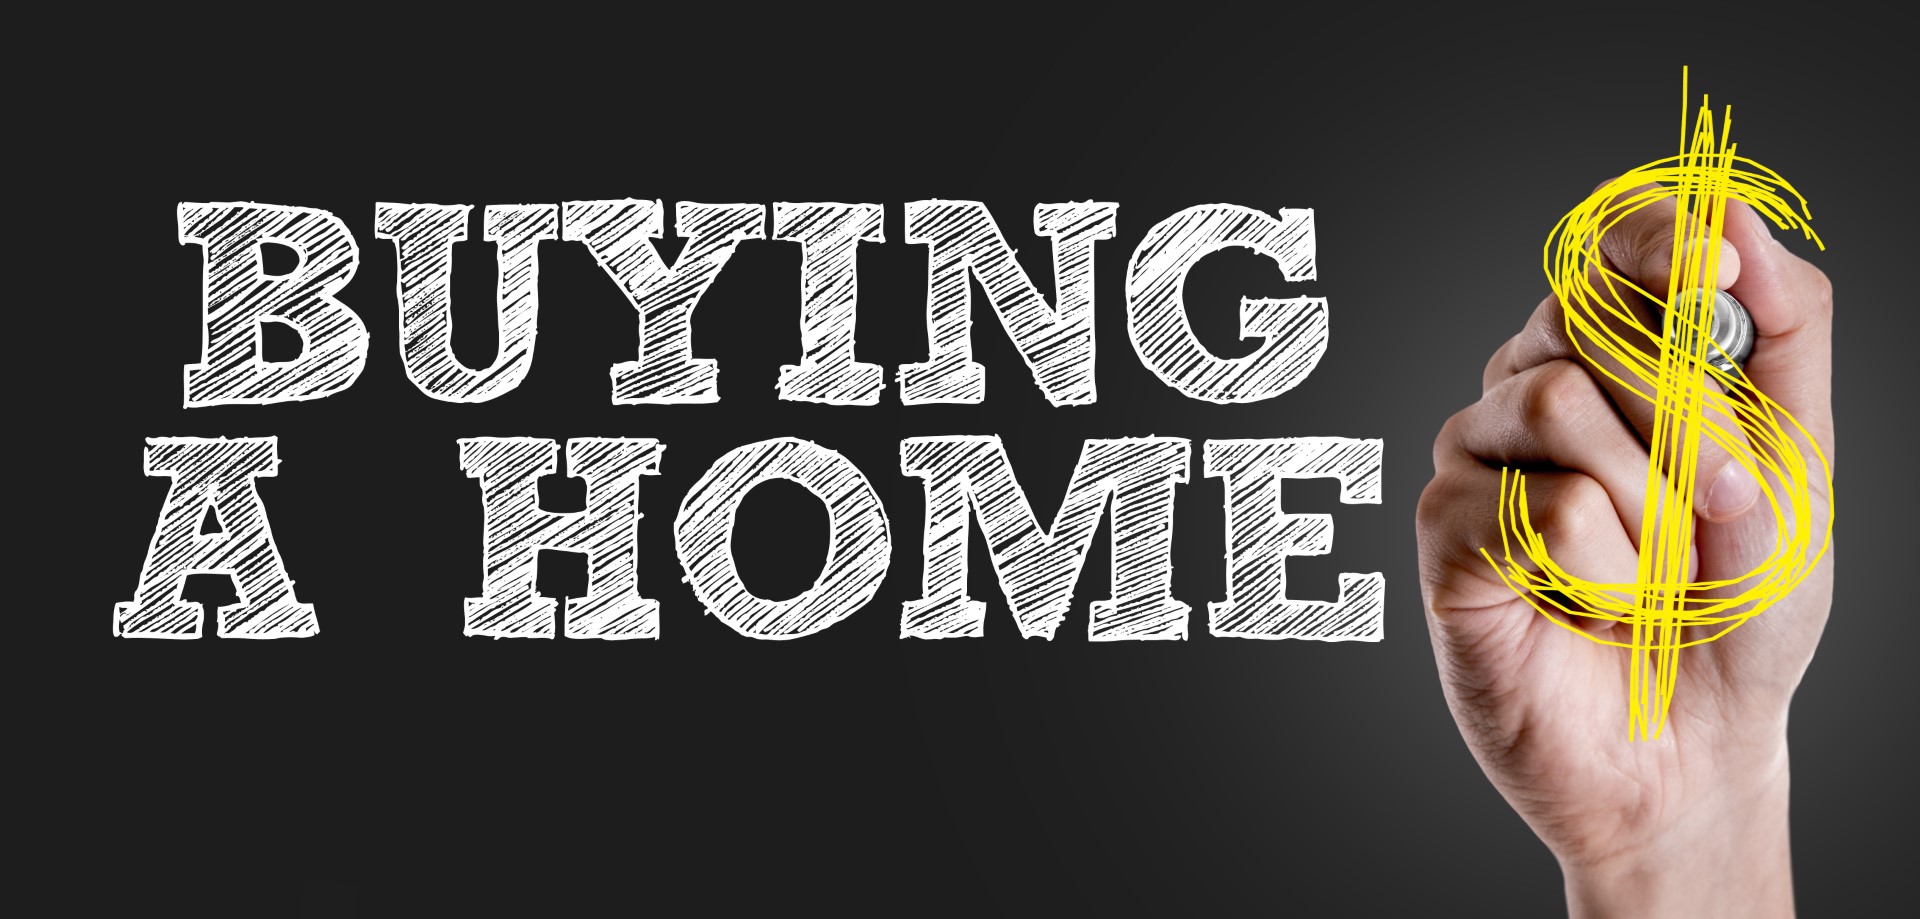 What Do Homebuyers Focus On While Choosing a Home to Buy?